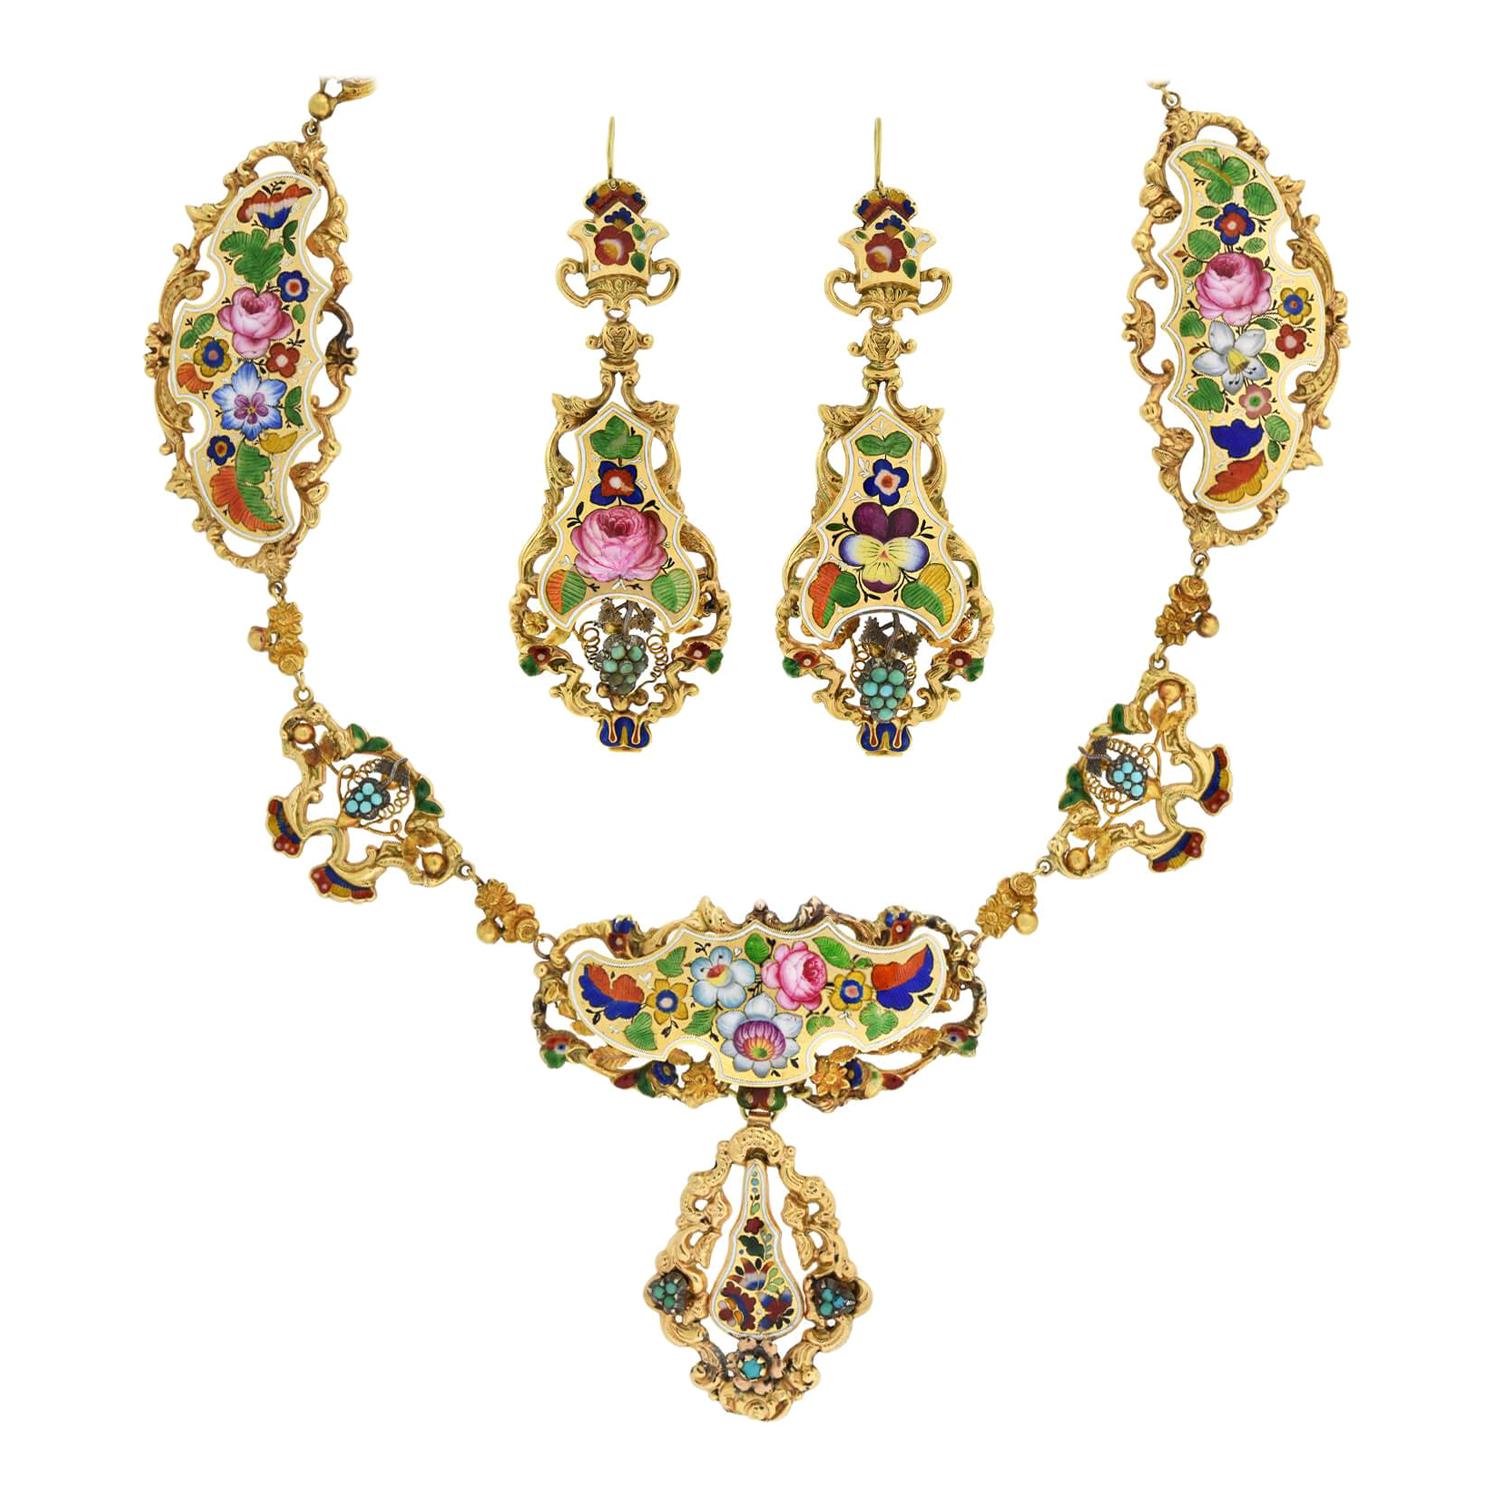 Early Victorian Swiss Enamel Necklace and Earring Set